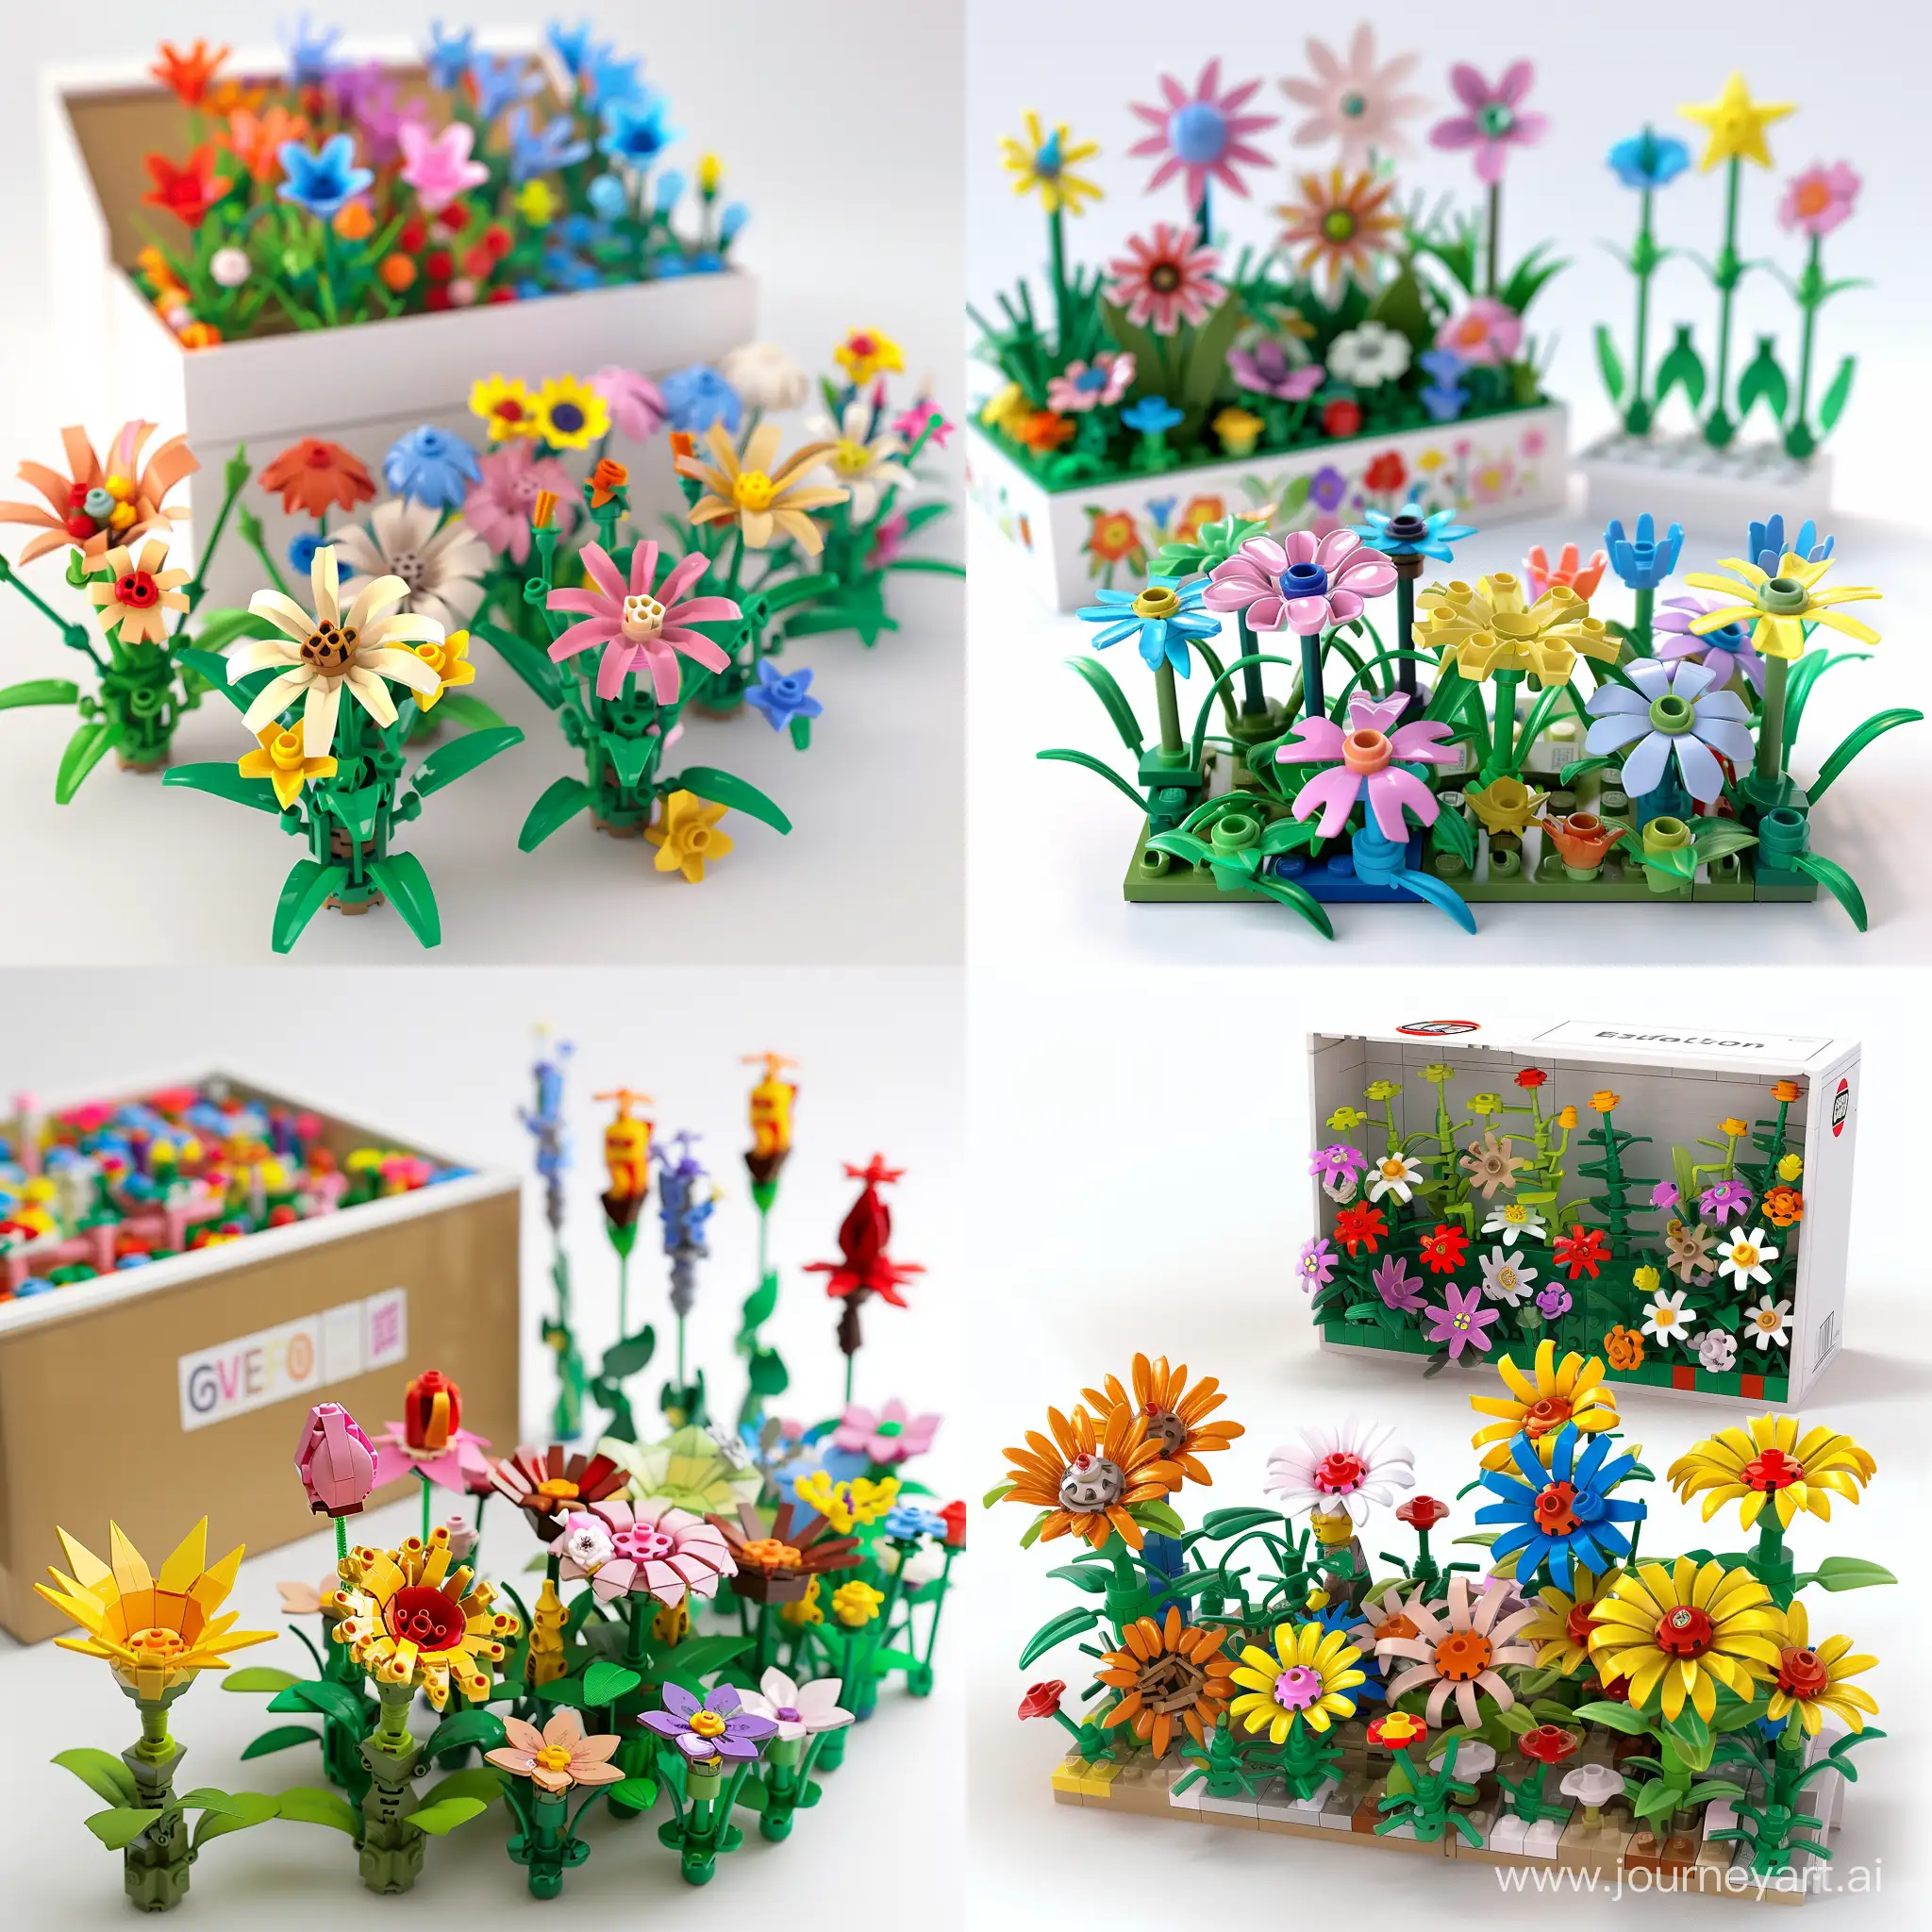 White background, 3d space, beautiful lego flowers in the foreground, a box of lego flowers in the background